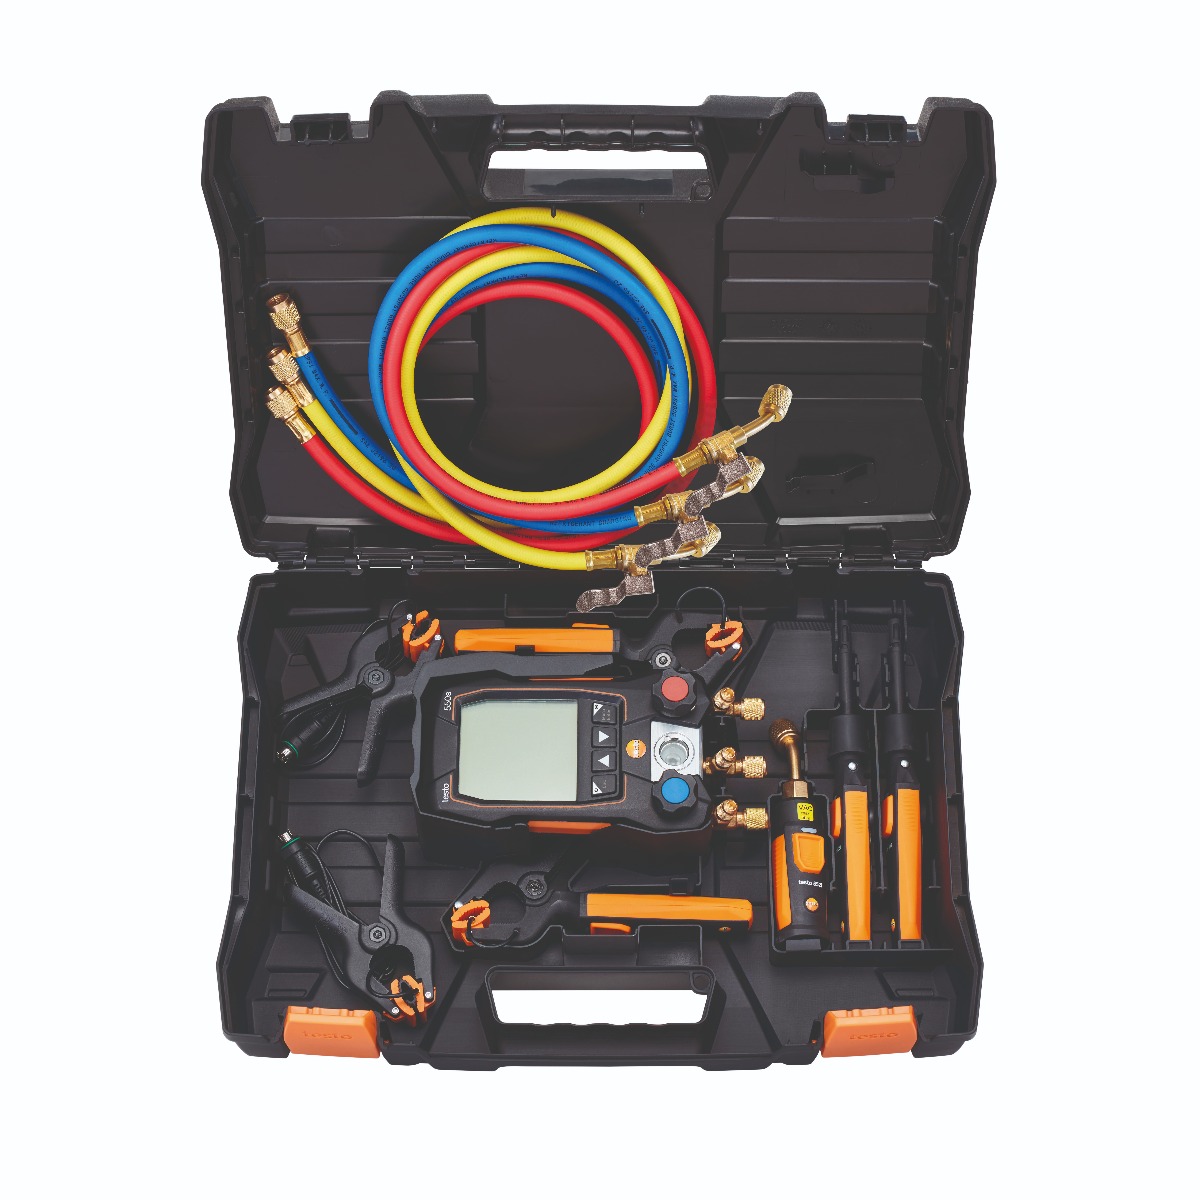 Testo 550s Smart Kit with filing hoses 0564 5503